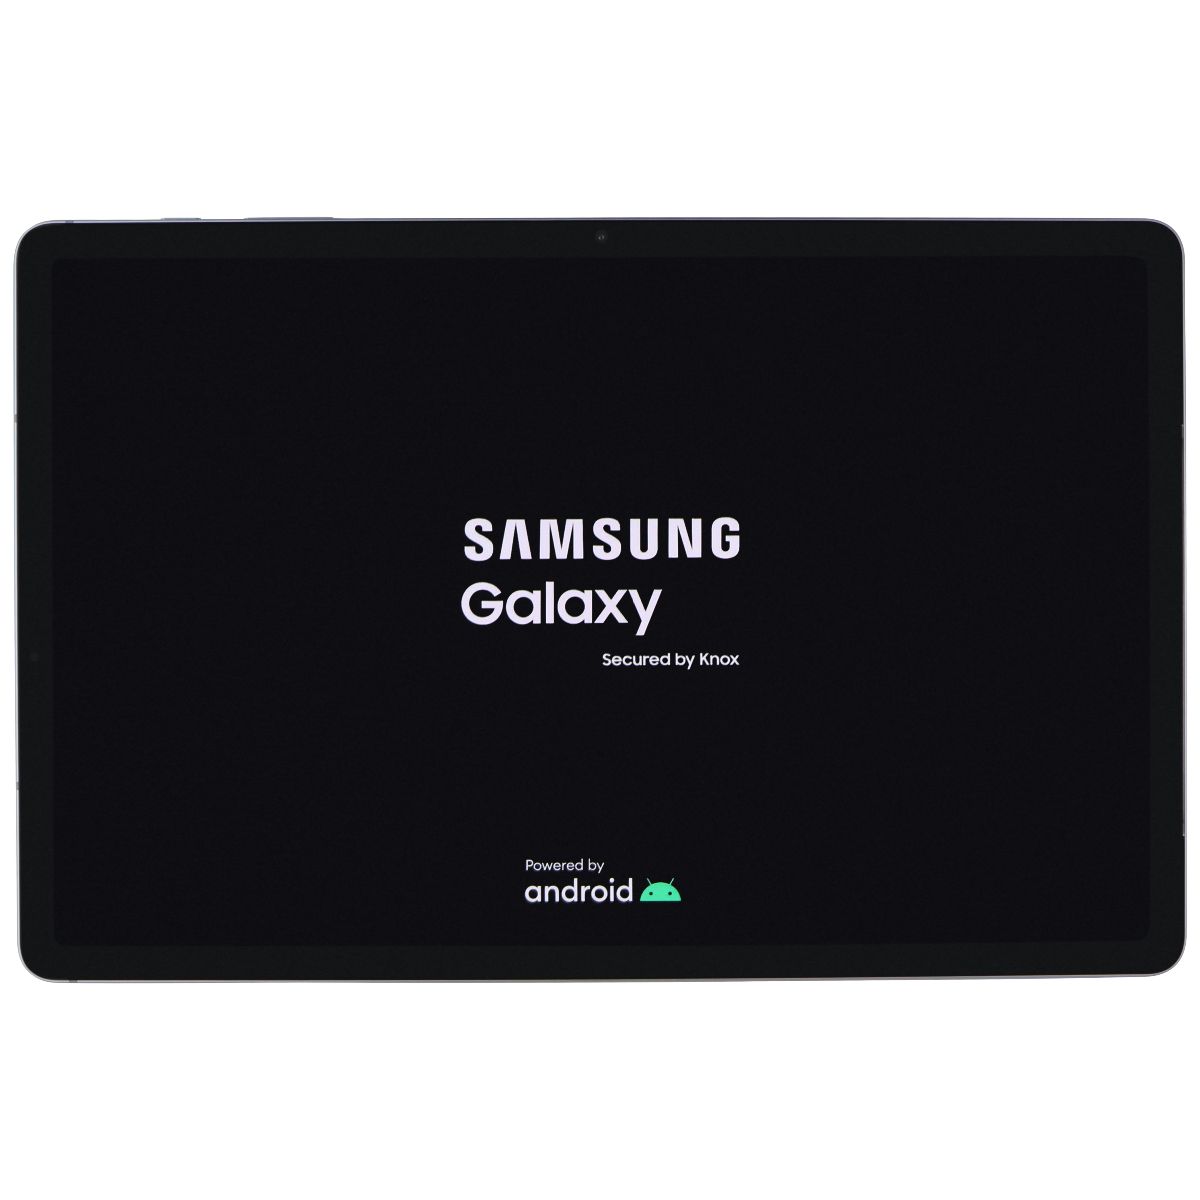 Samsung Galaxy Tab S7 FE (SM-T733) 12.4-in WiFi Only 128GB - Mystic Green iPads, Tablets & eBook Readers Samsung    - Simple Cell Bulk Wholesale Pricing - USA Seller